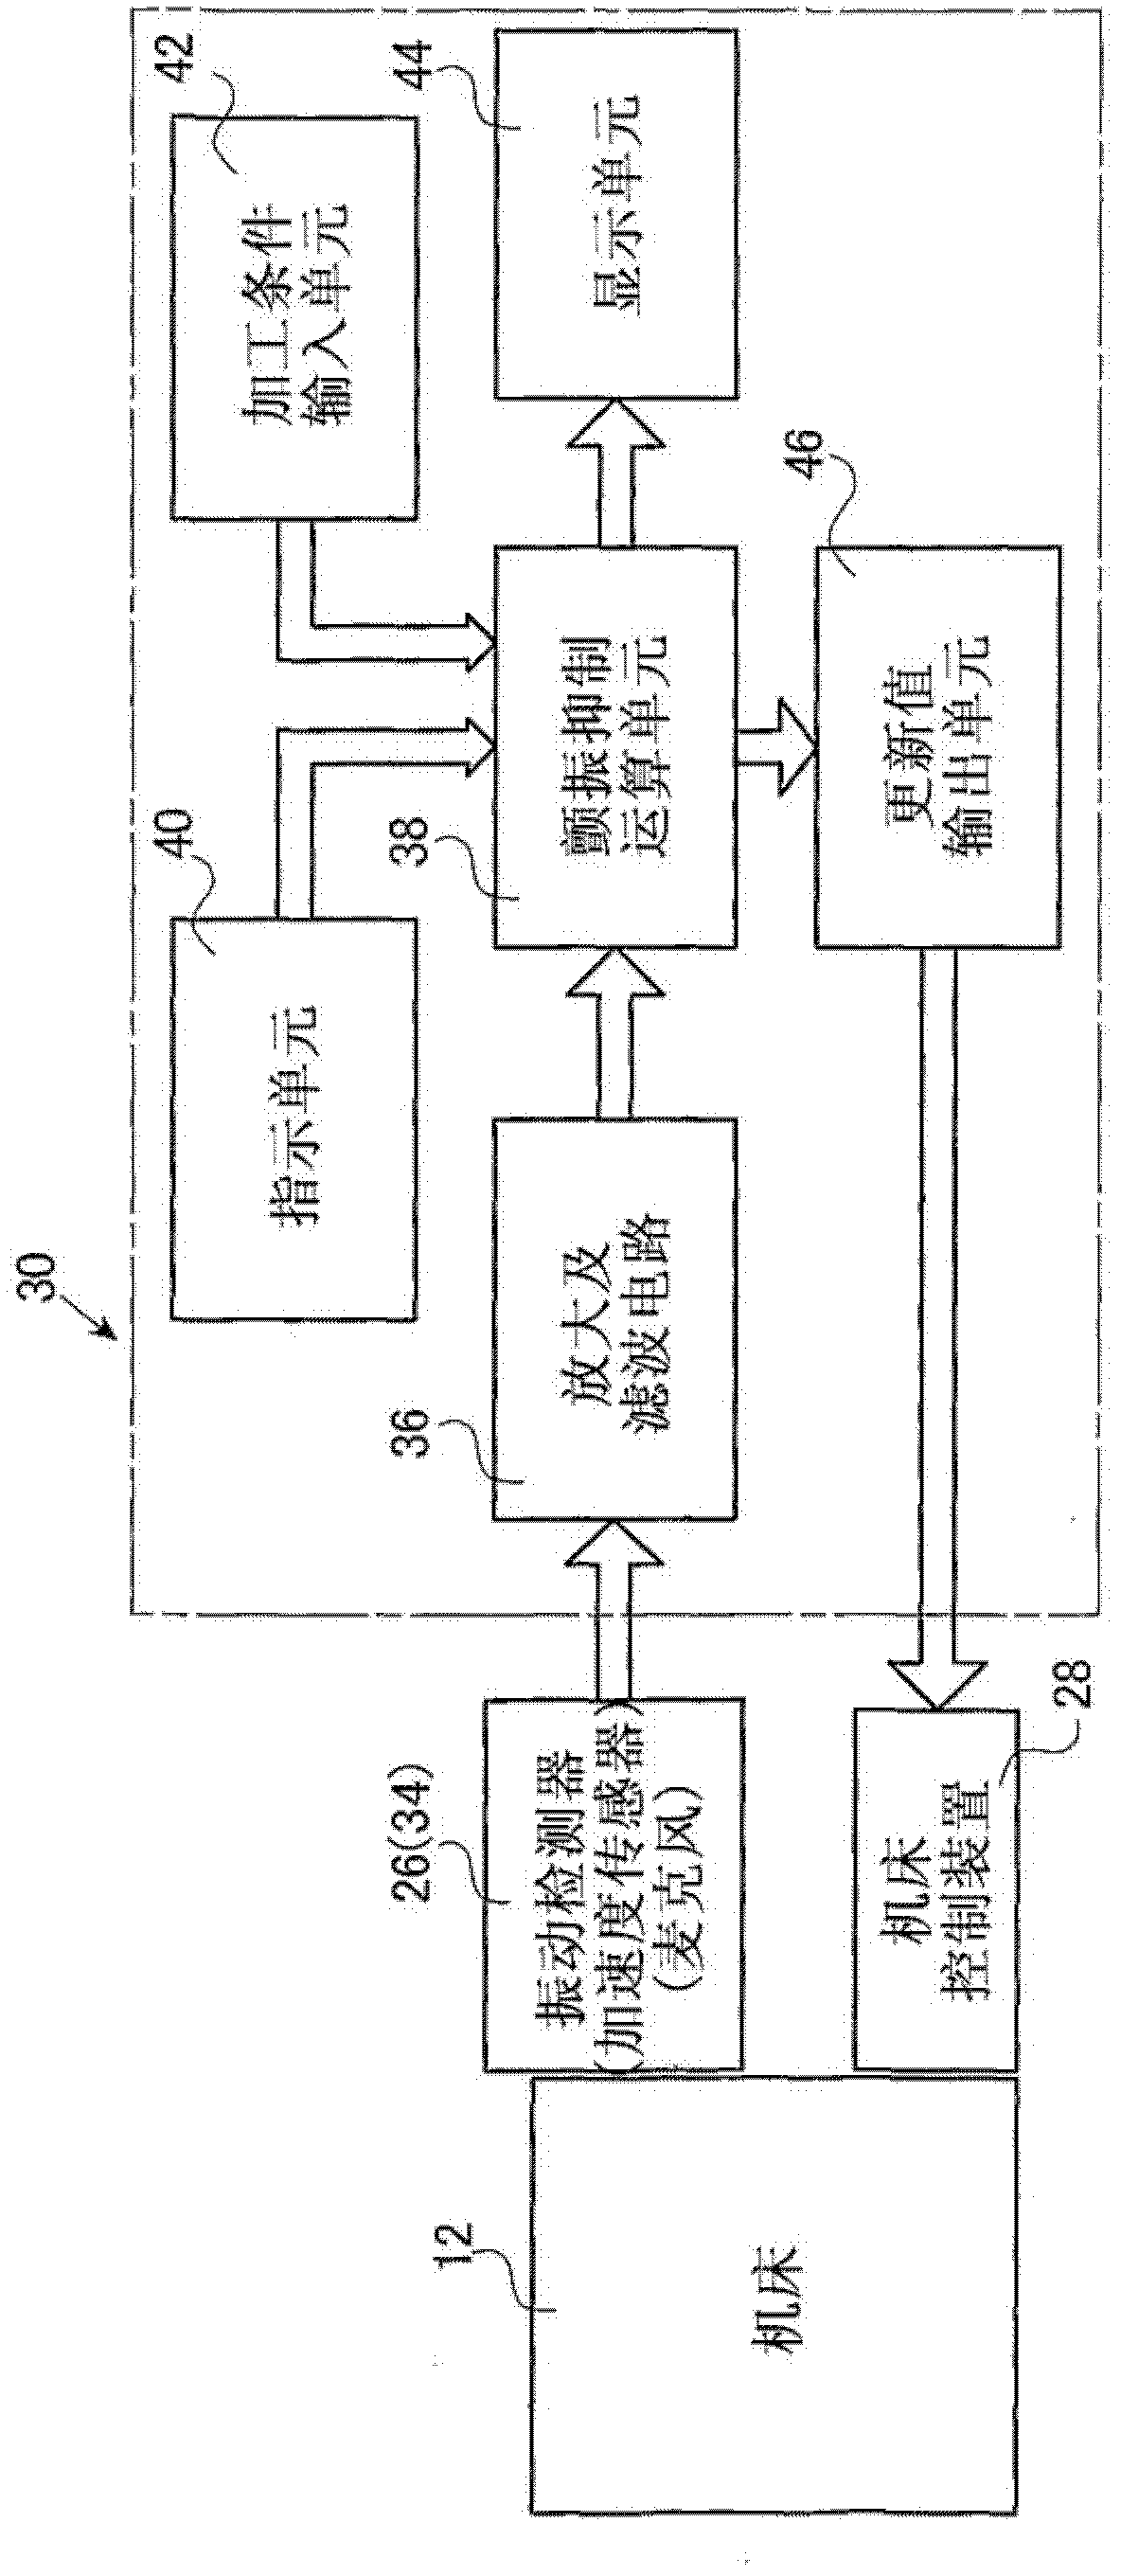 Method and device for suppressing chattering of work machine